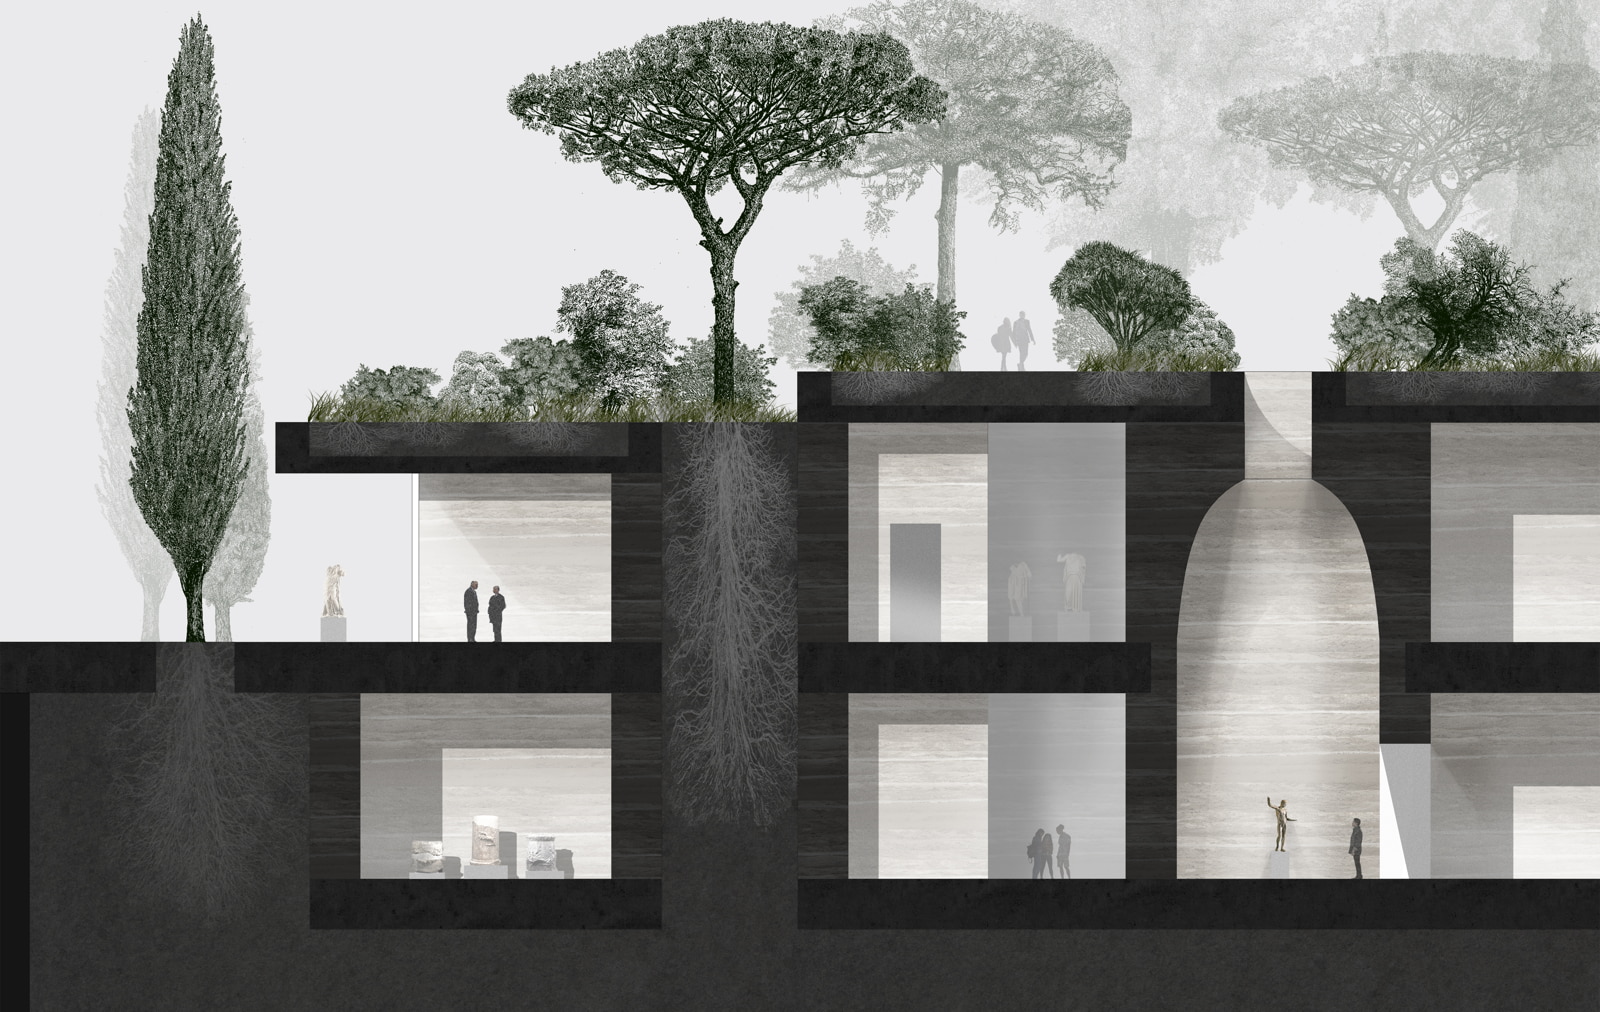 Archisearch David Chipperfield Architects Berlin has won the competition for the National Archaeological Museum in Athens